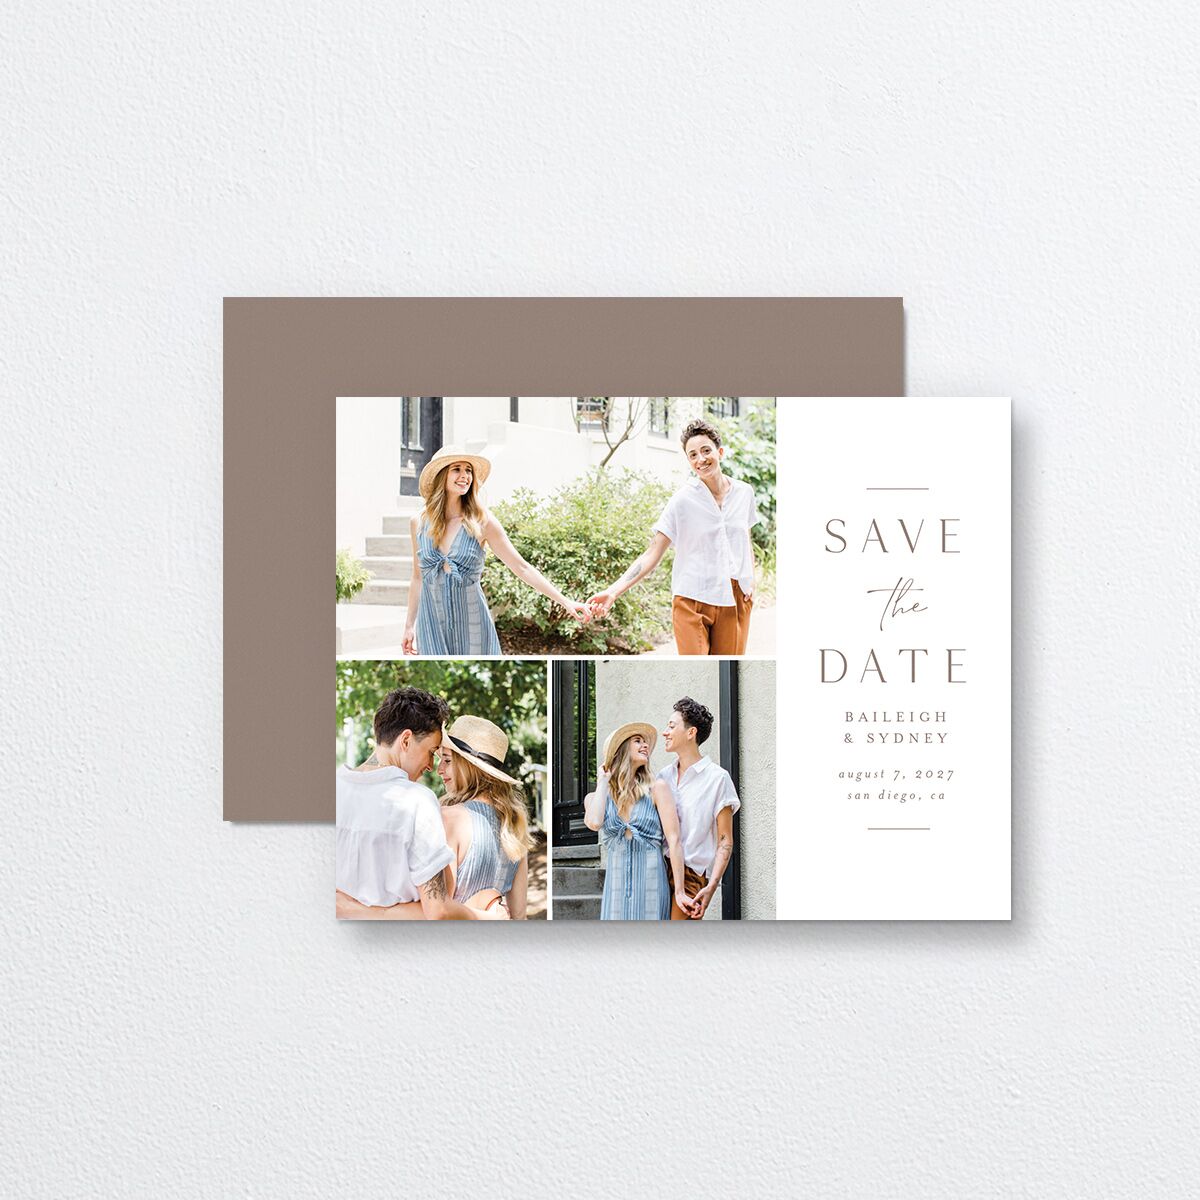 Side Panel Save the Date Petite Cards front-and-back in Cream